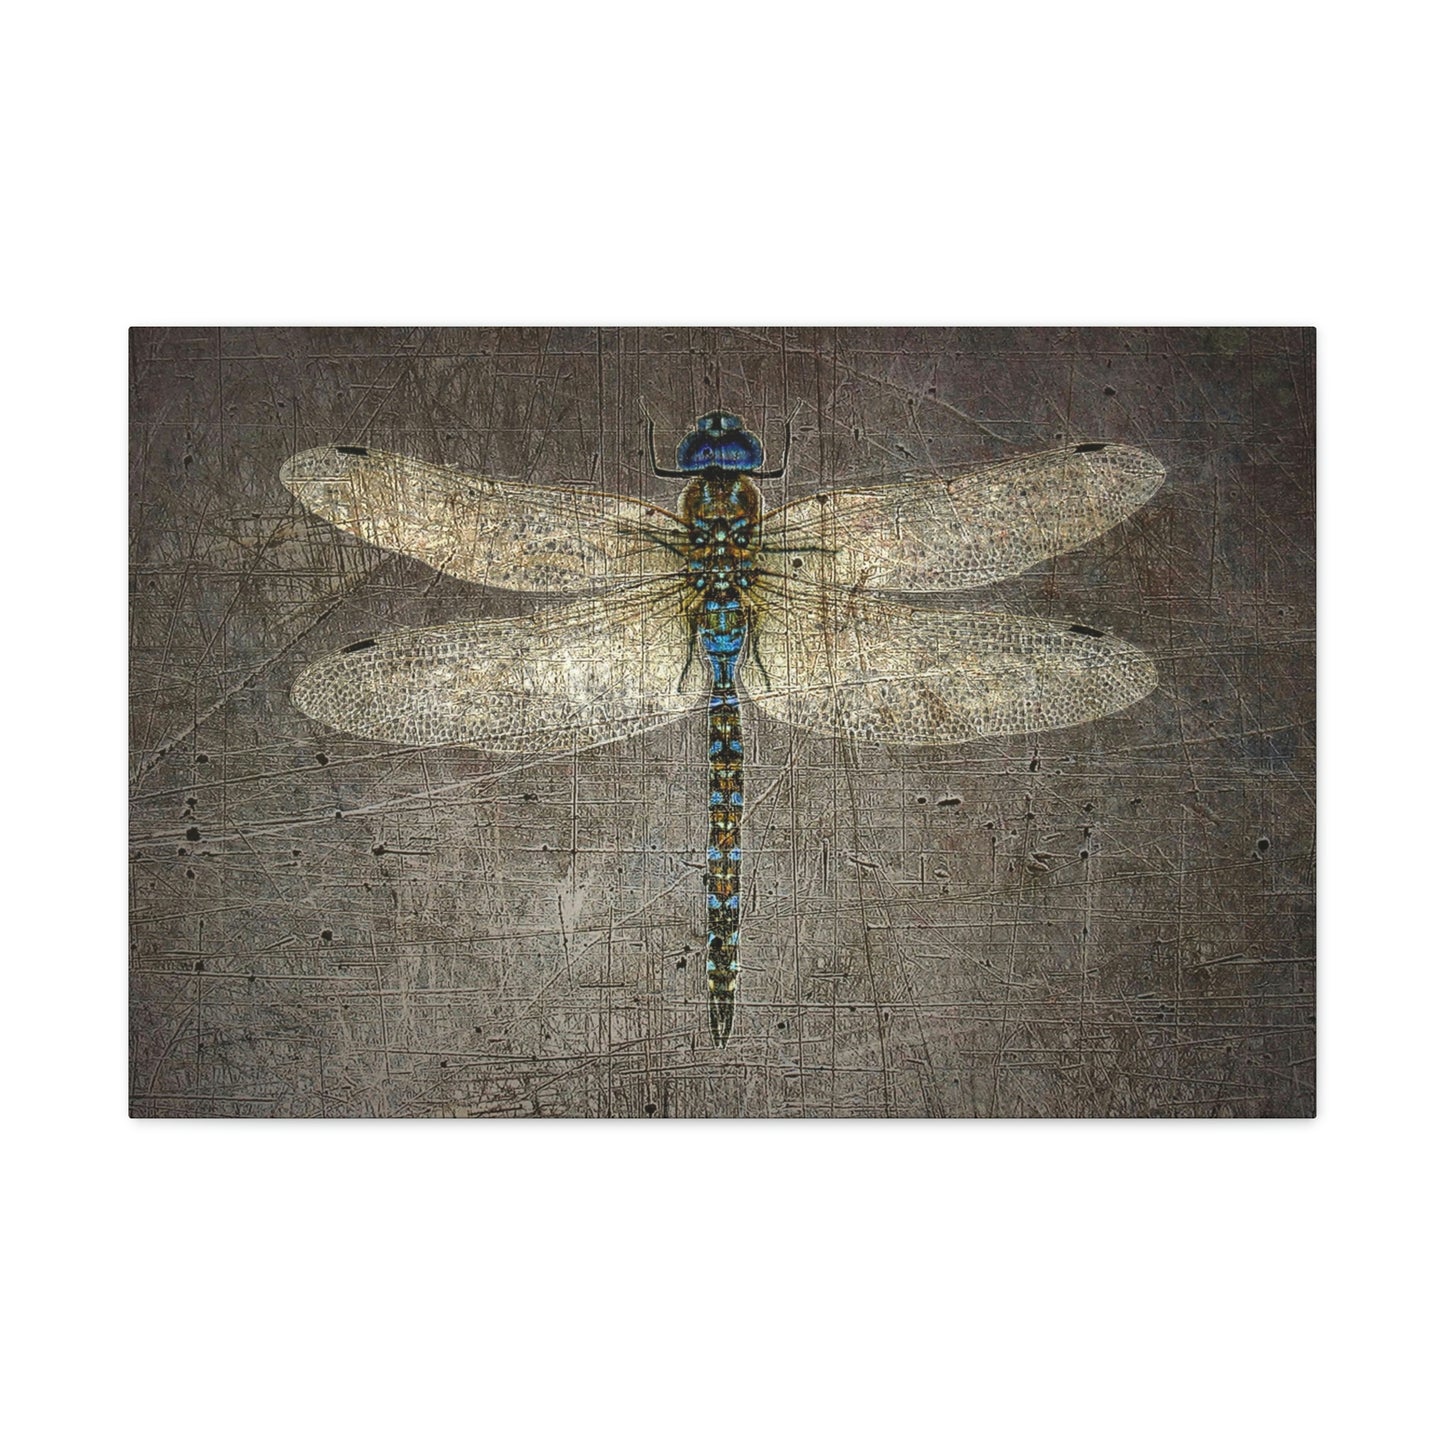 Dragonfly on Distressed Stone Background Rectangular Print on Unframed Stretched Canvas